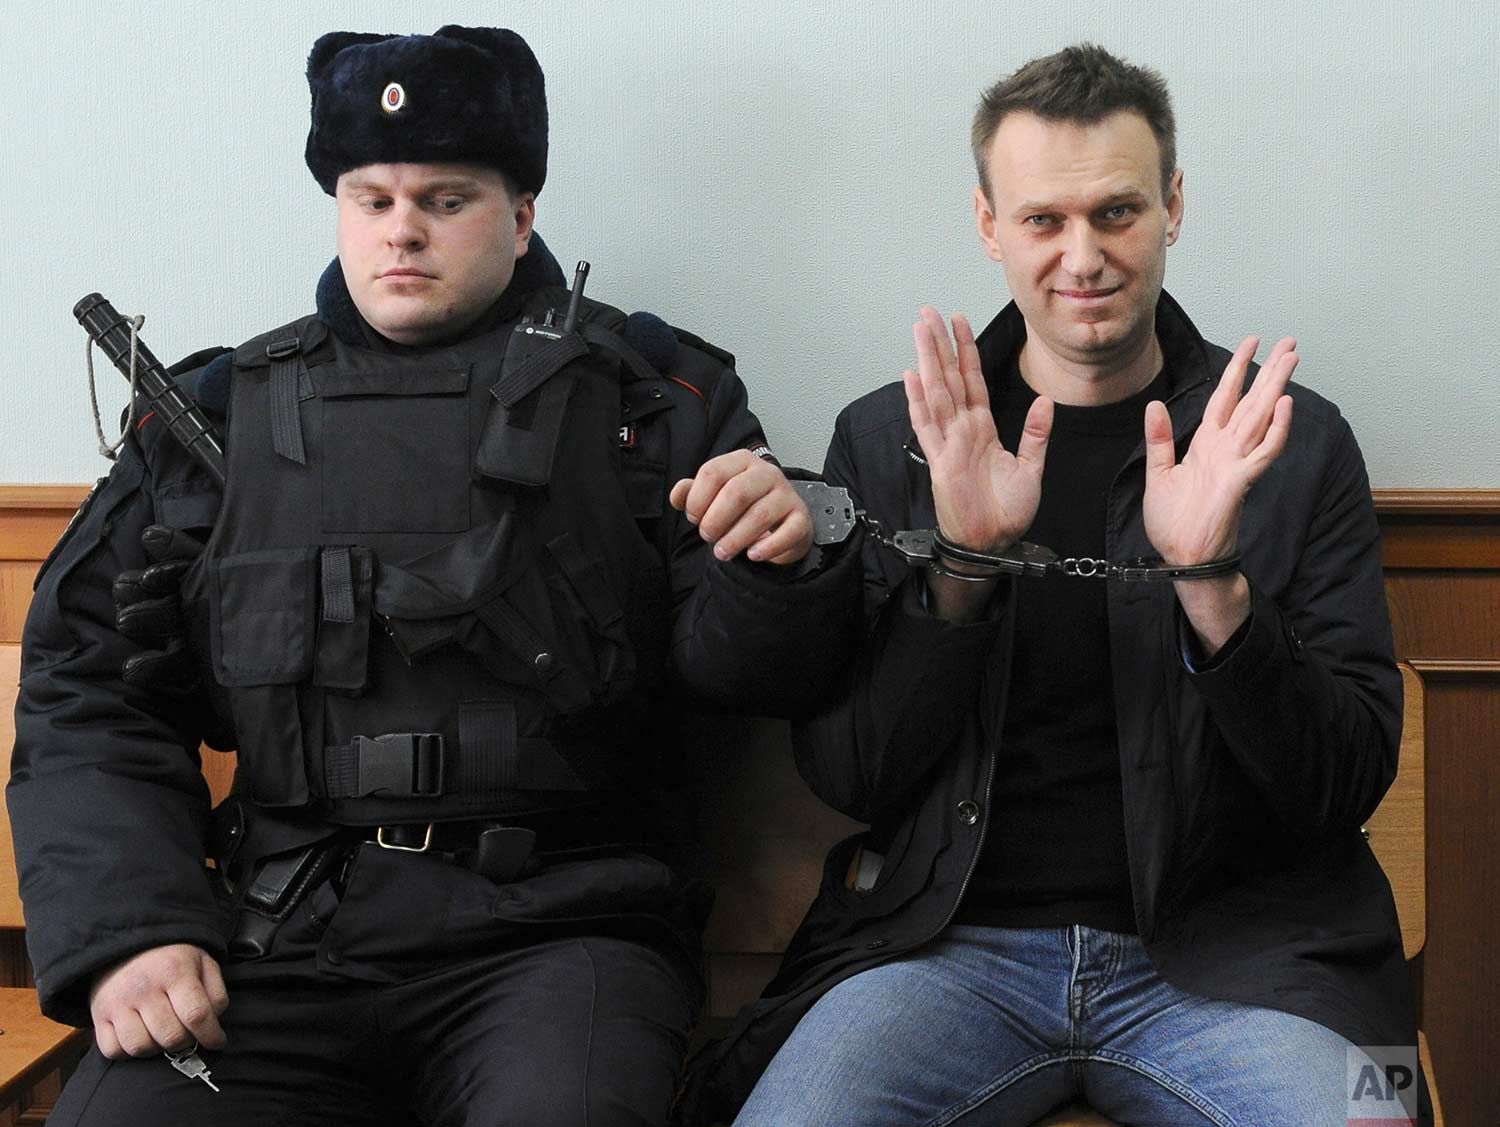  In this Thursday, March 30, 2017 photo, Russian opposition leader Alexei Navalny, right, poses for press in court in Moscow, Russia. Navalny attends a court hearing on his appeal. Navalny, who organized a wave of nationwide protests against governme